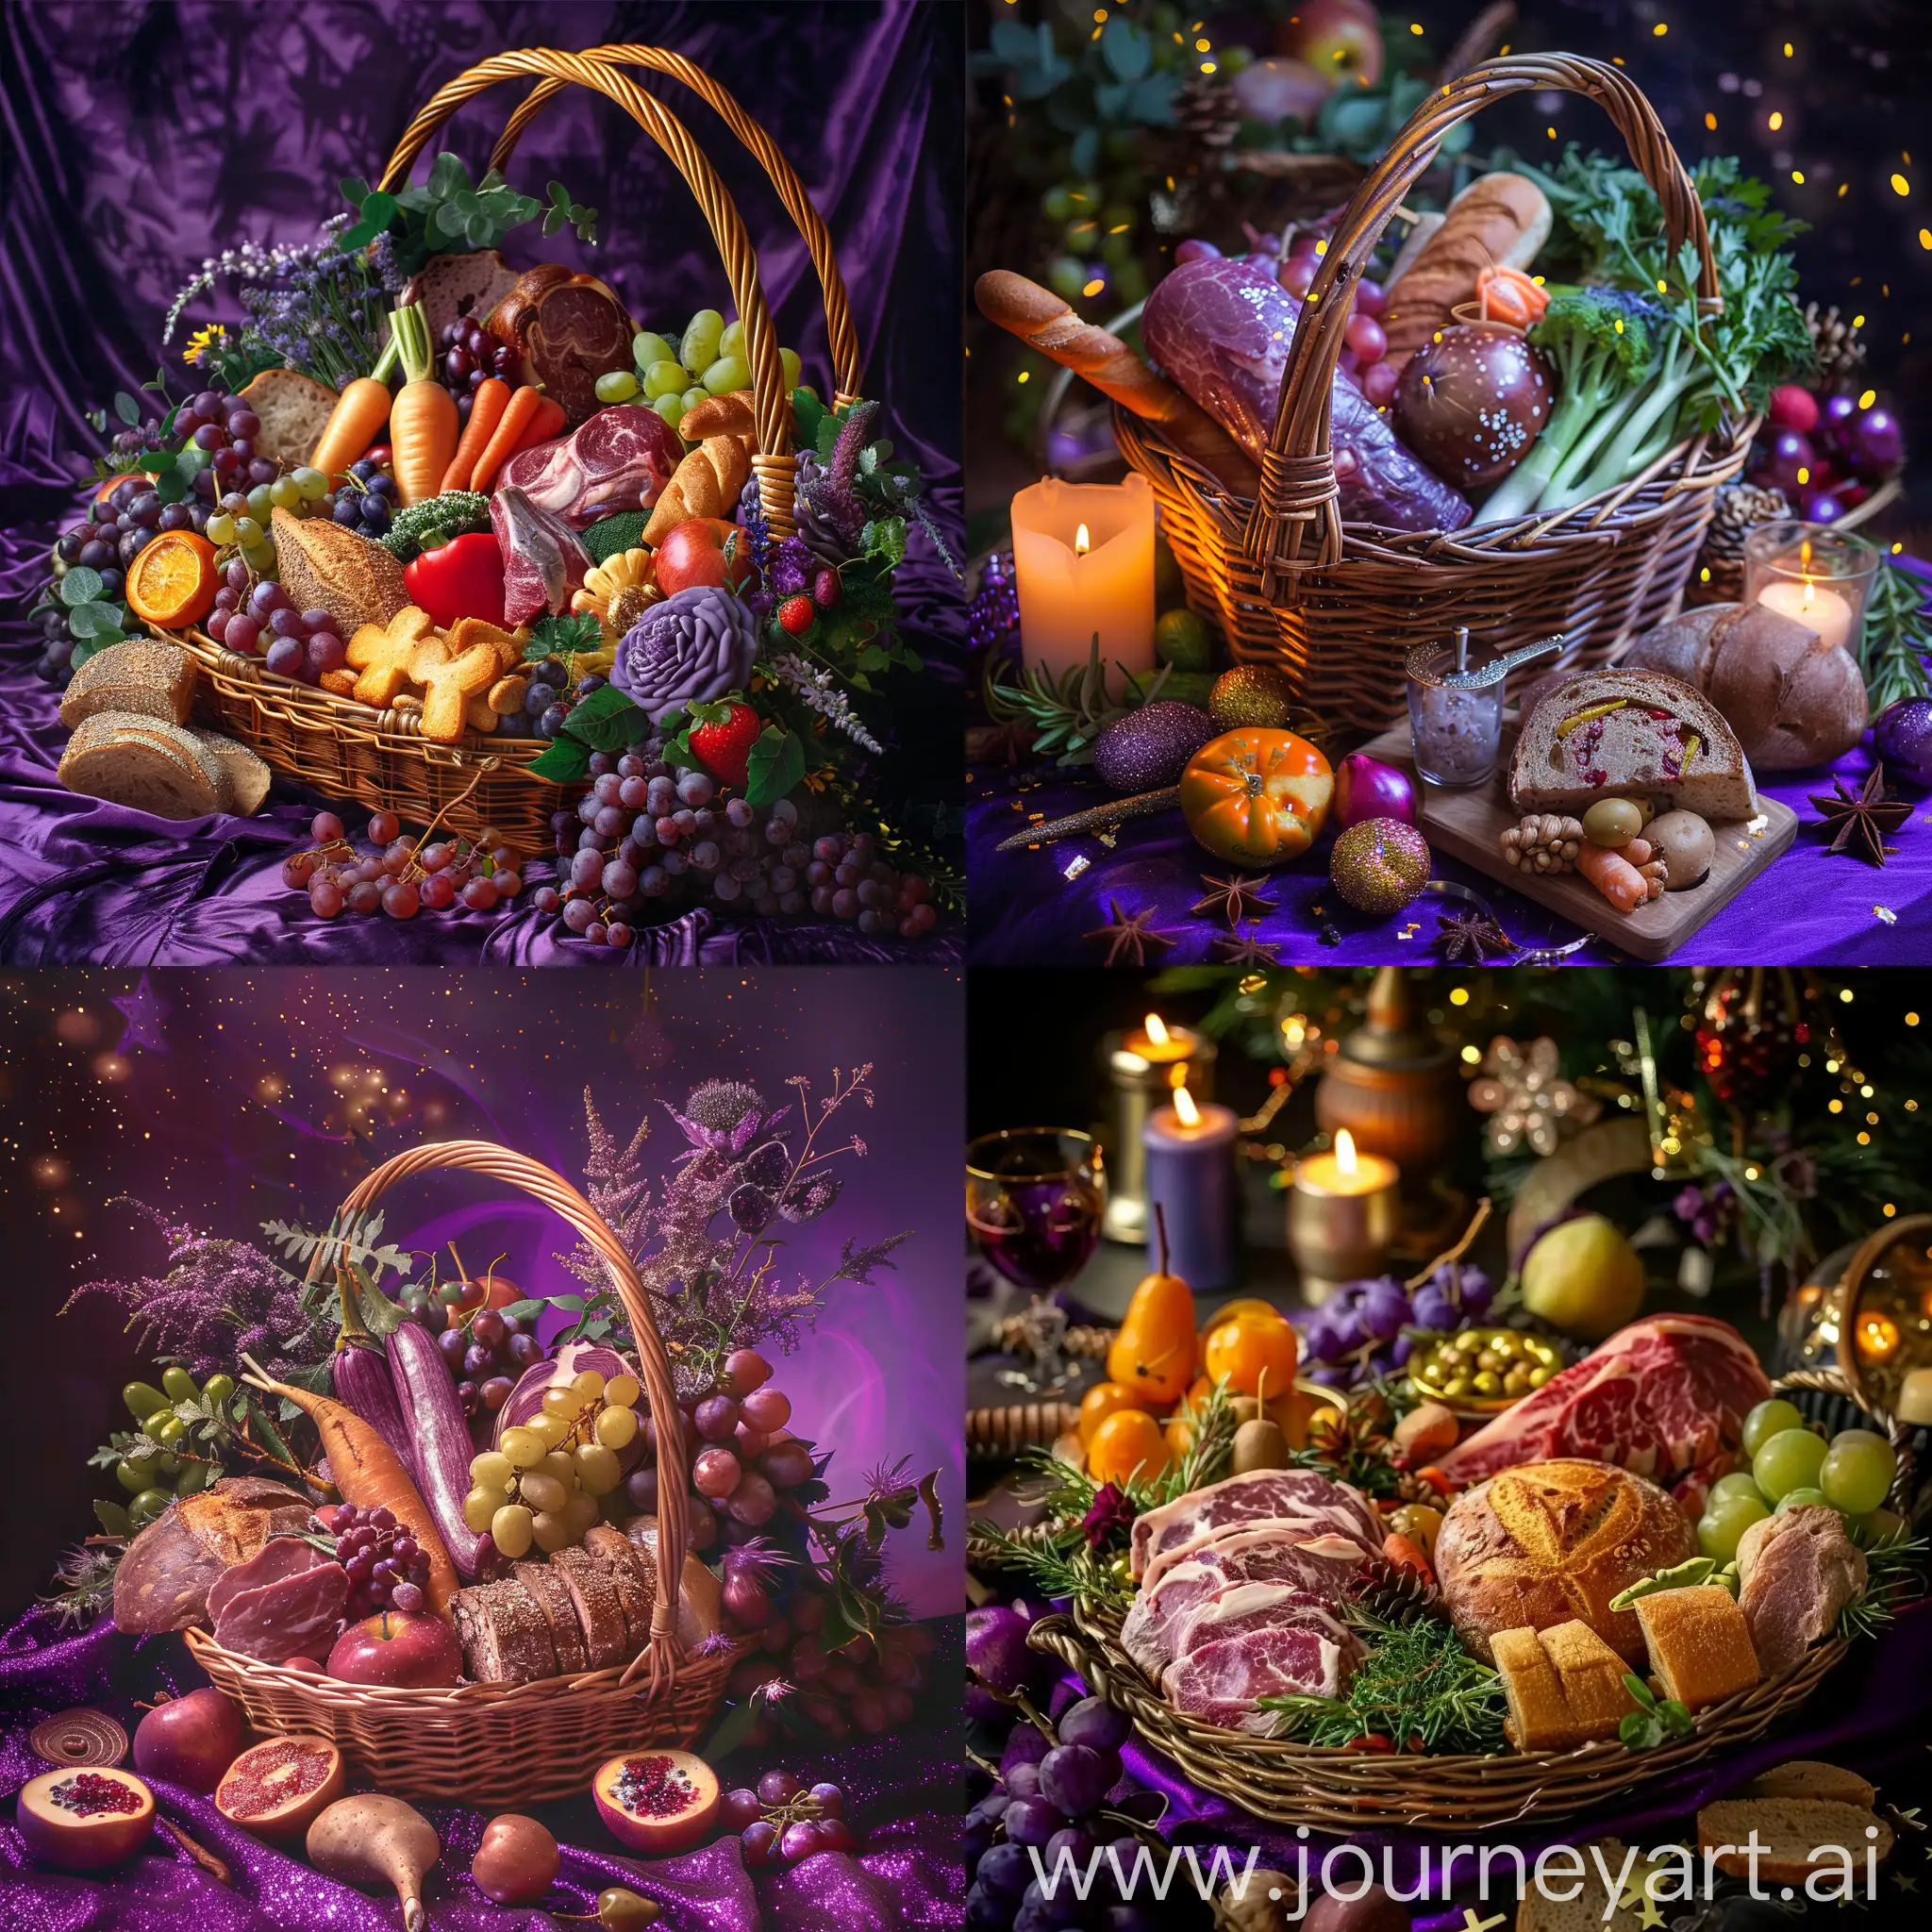 Magical-Golden-Food-Basket-with-Meat-Bread-Vegetables-and-Fruit